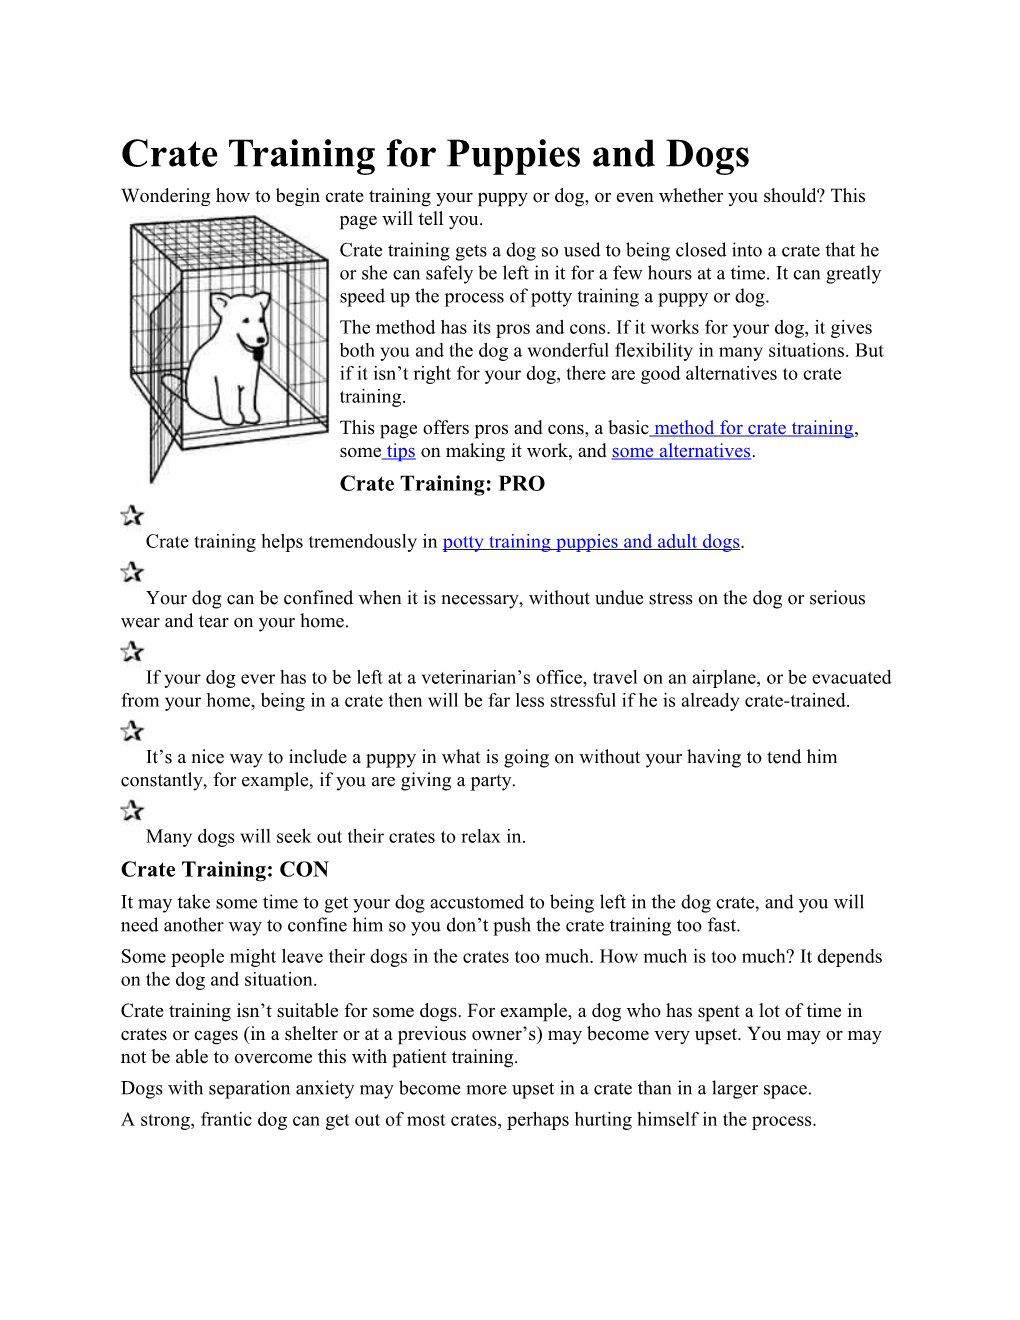 Crate Training for Puppies and Dogs